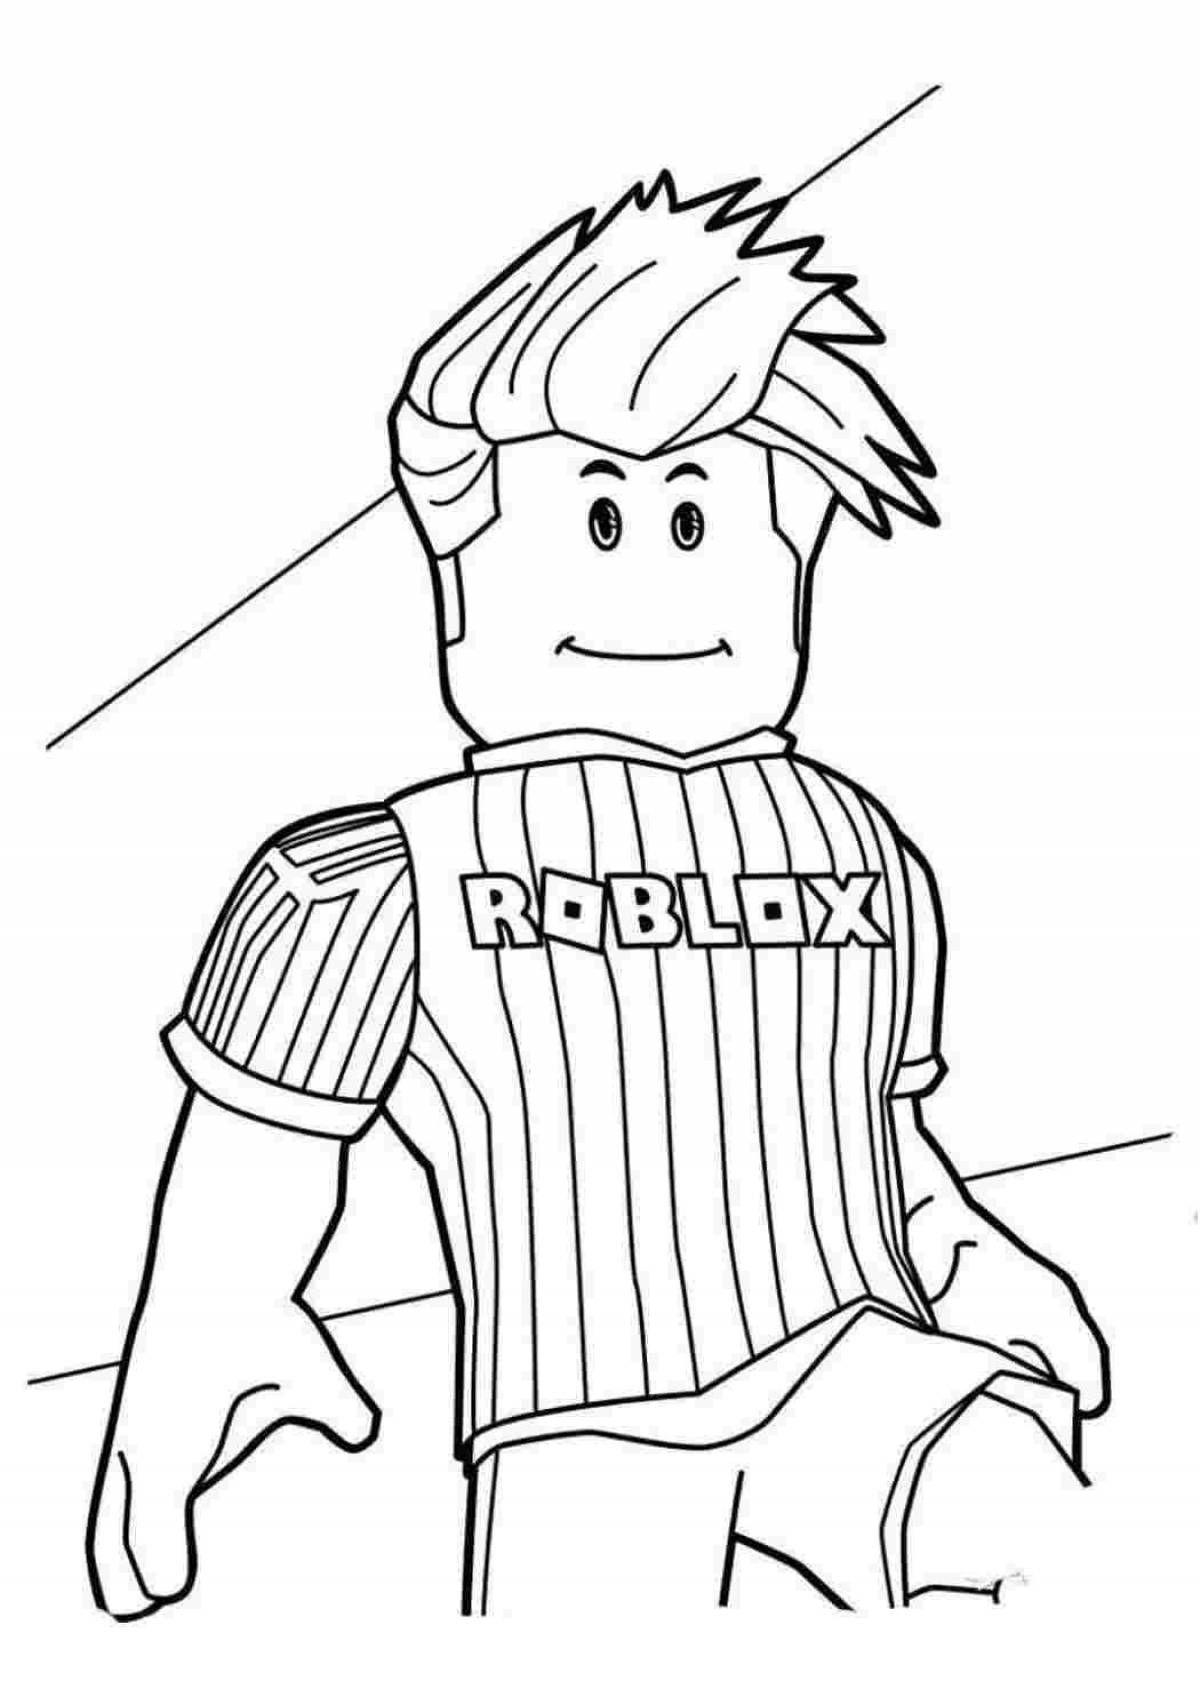 Clear roblox coloring page